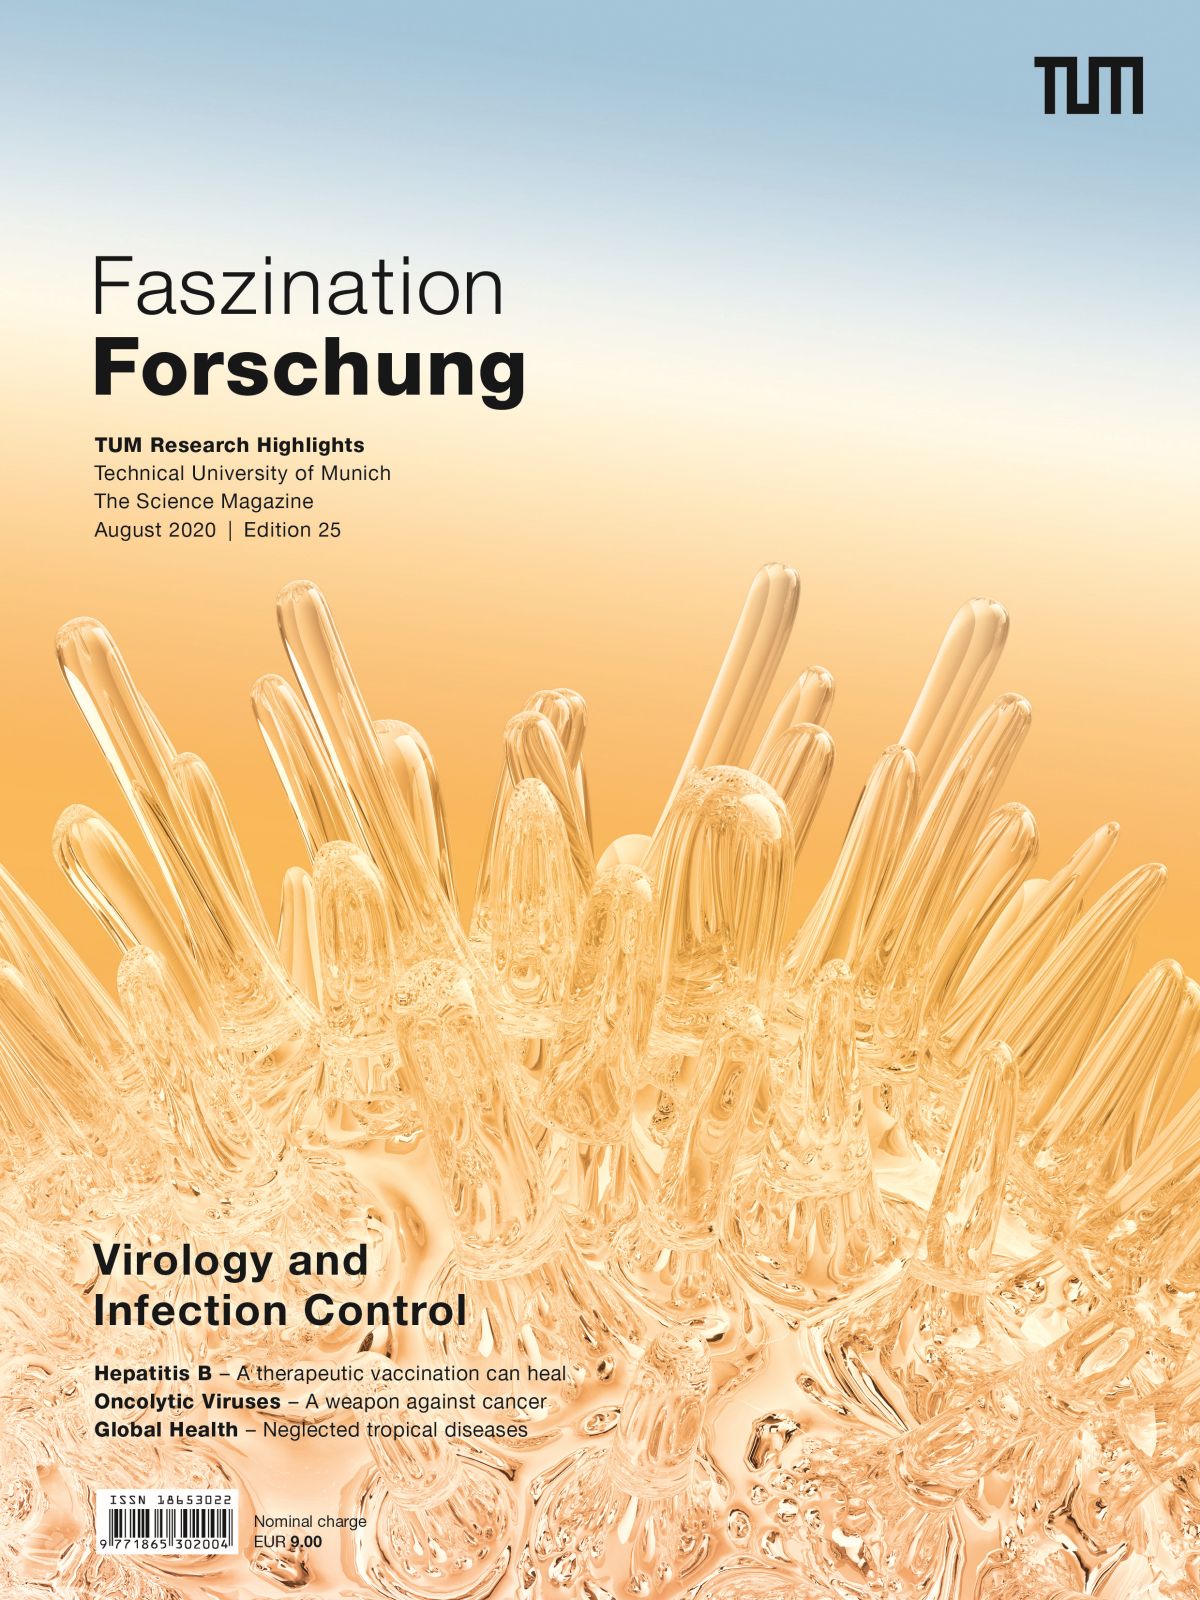 Cover page of “Faszination Forschung” magazine, edition 28